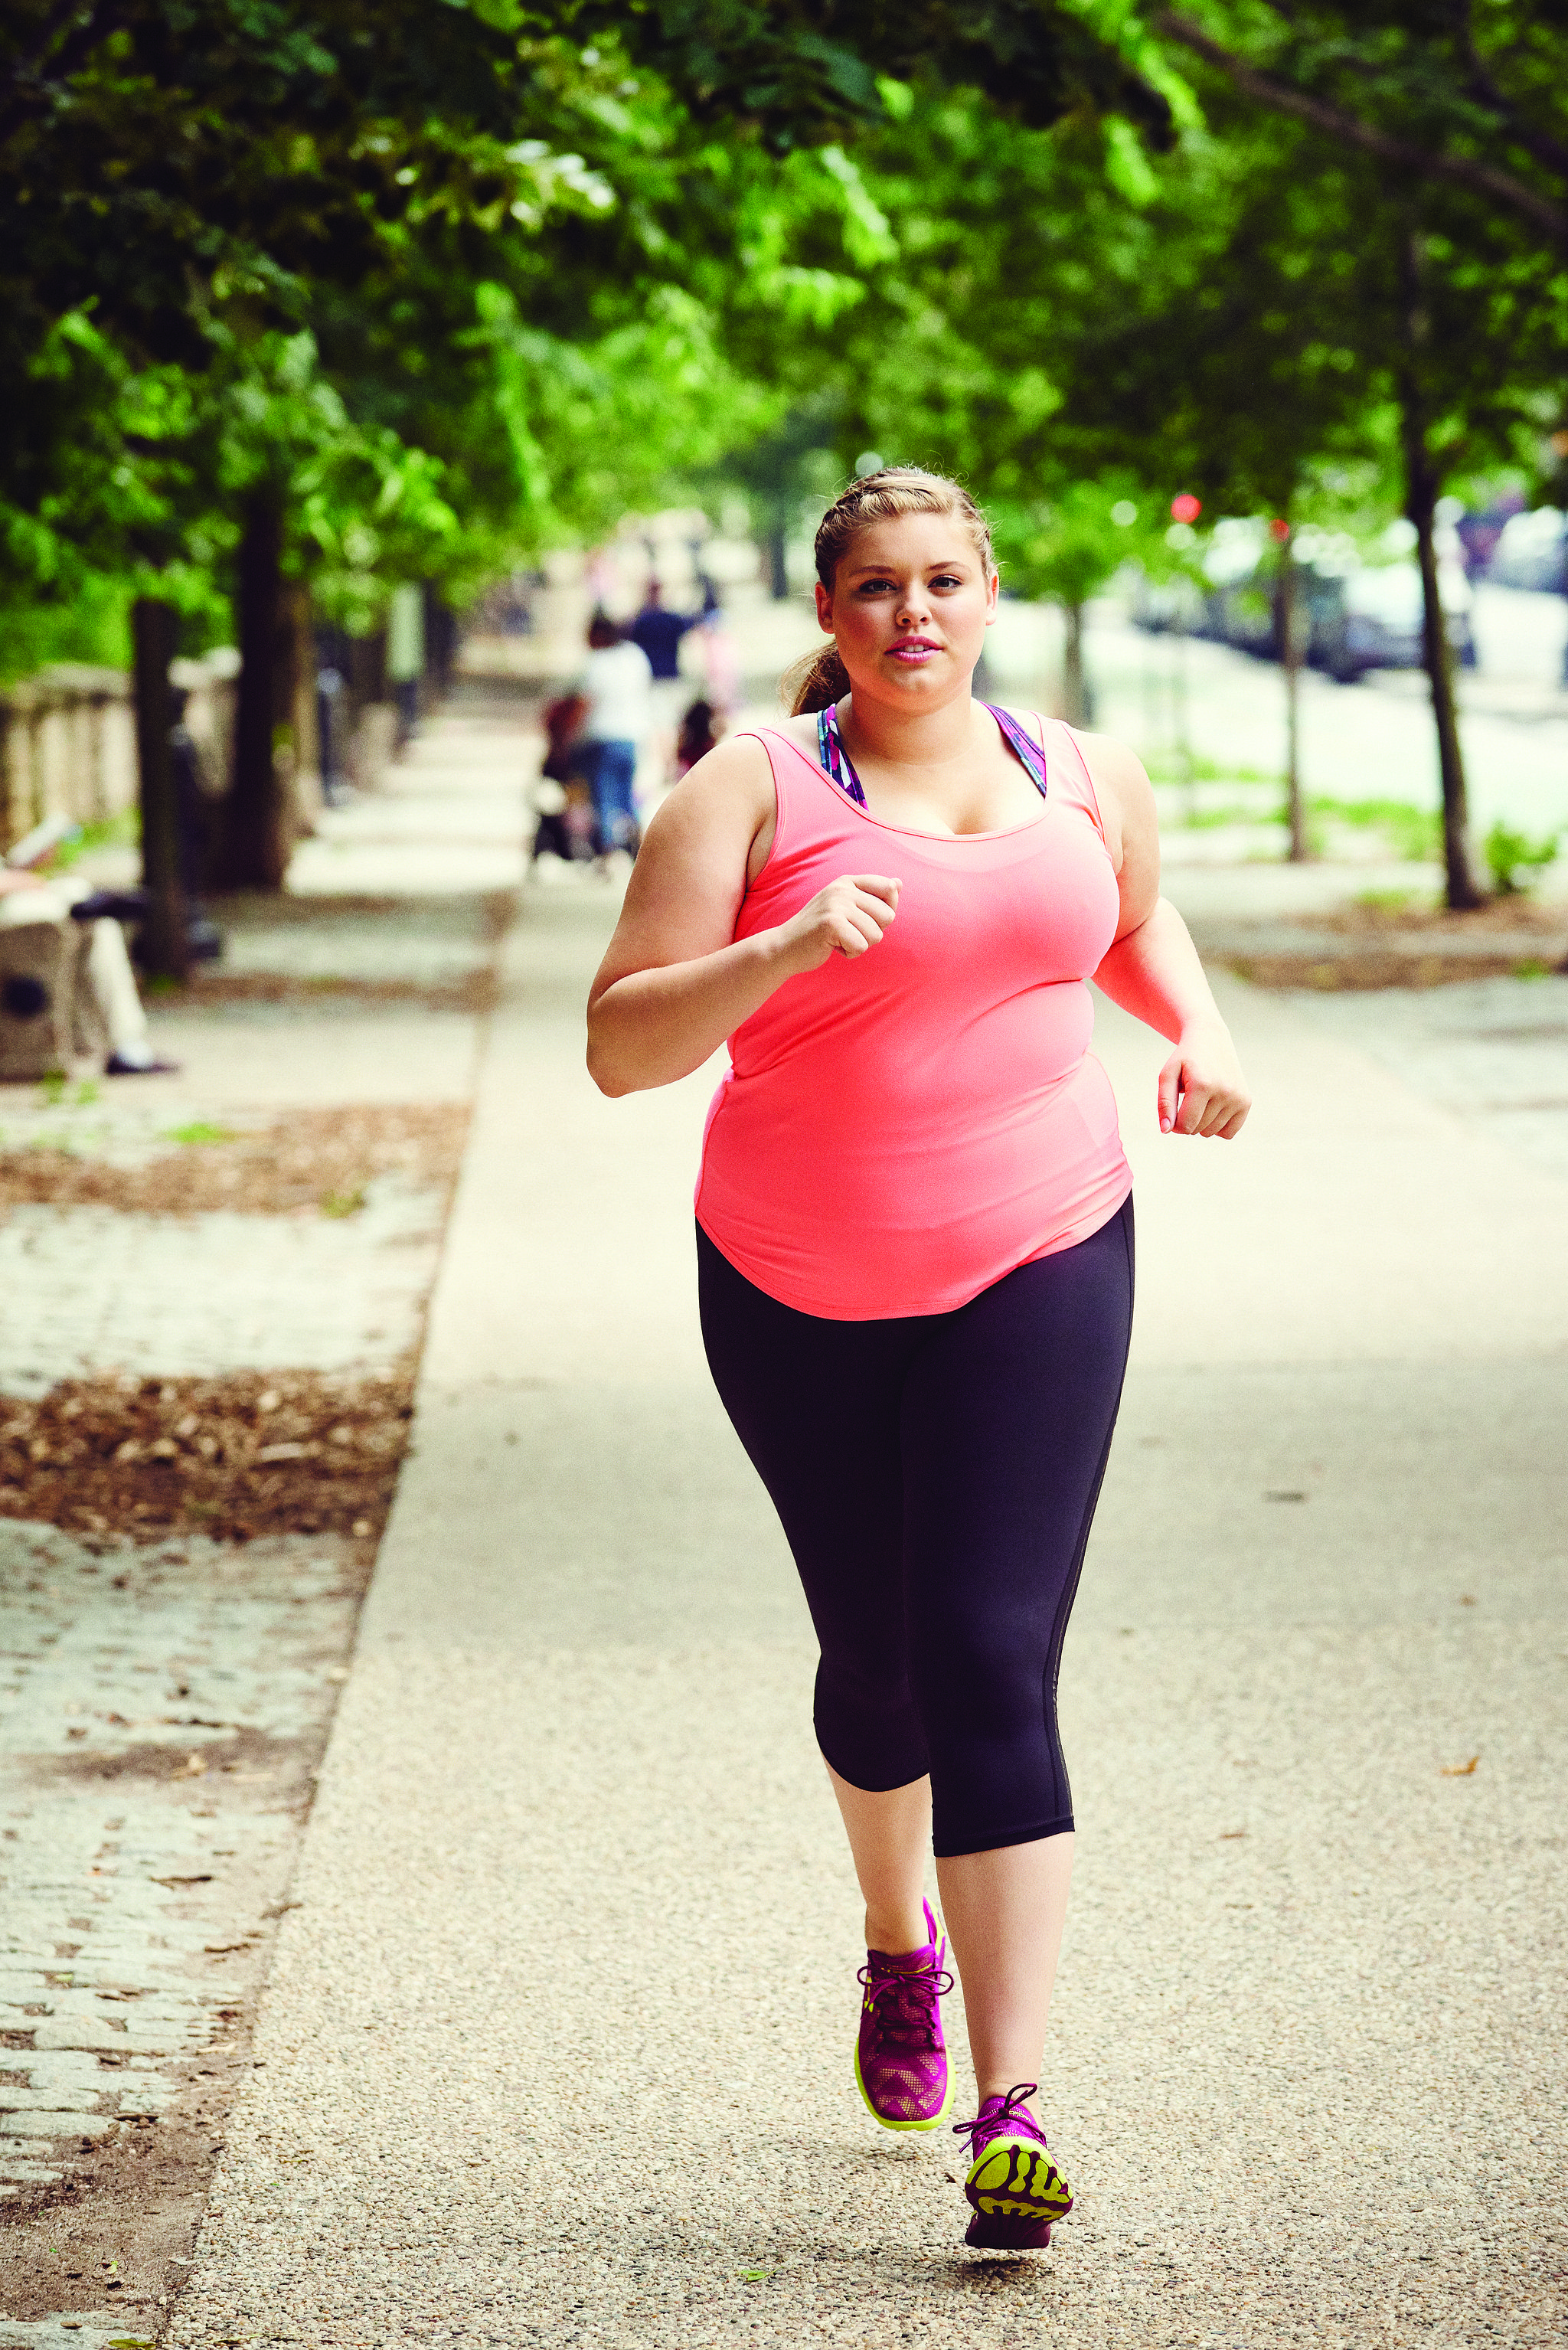 Women's Running Chose a Plus-Size Model For Its Latest Cover, and We Couldn't Be Happier